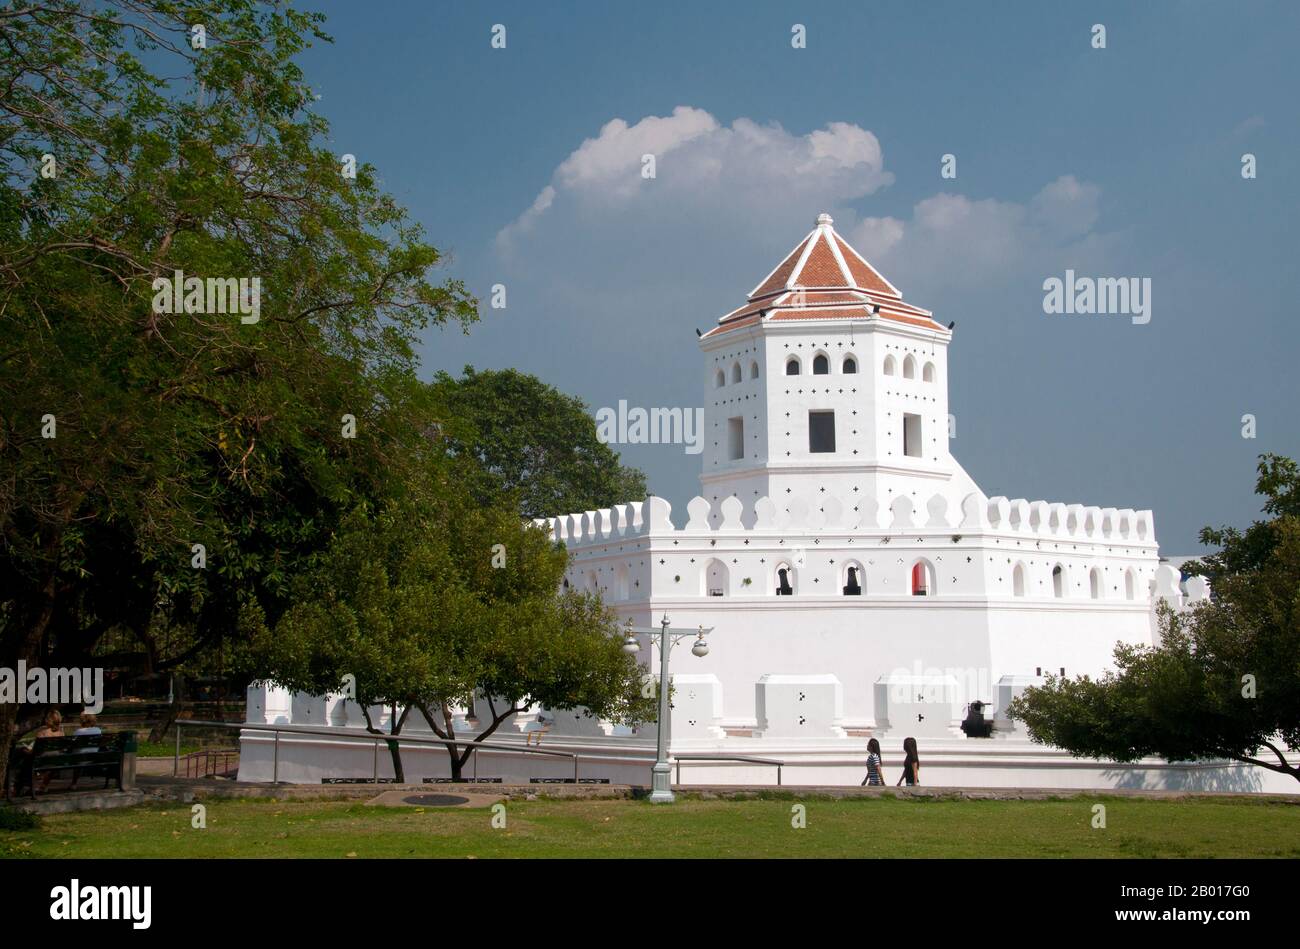 Thailand: Phra Sumen Fort, Bangkok.  The Phra Sumen Fort was constructed in 1783 during the reign of King Buddha Yodfa Chulaloke (Rama I). It is one of 14 forts that used to protect Bangkok. Today only two survive, Phra Sumen Fort and Fort Mahakan. Stock Photo